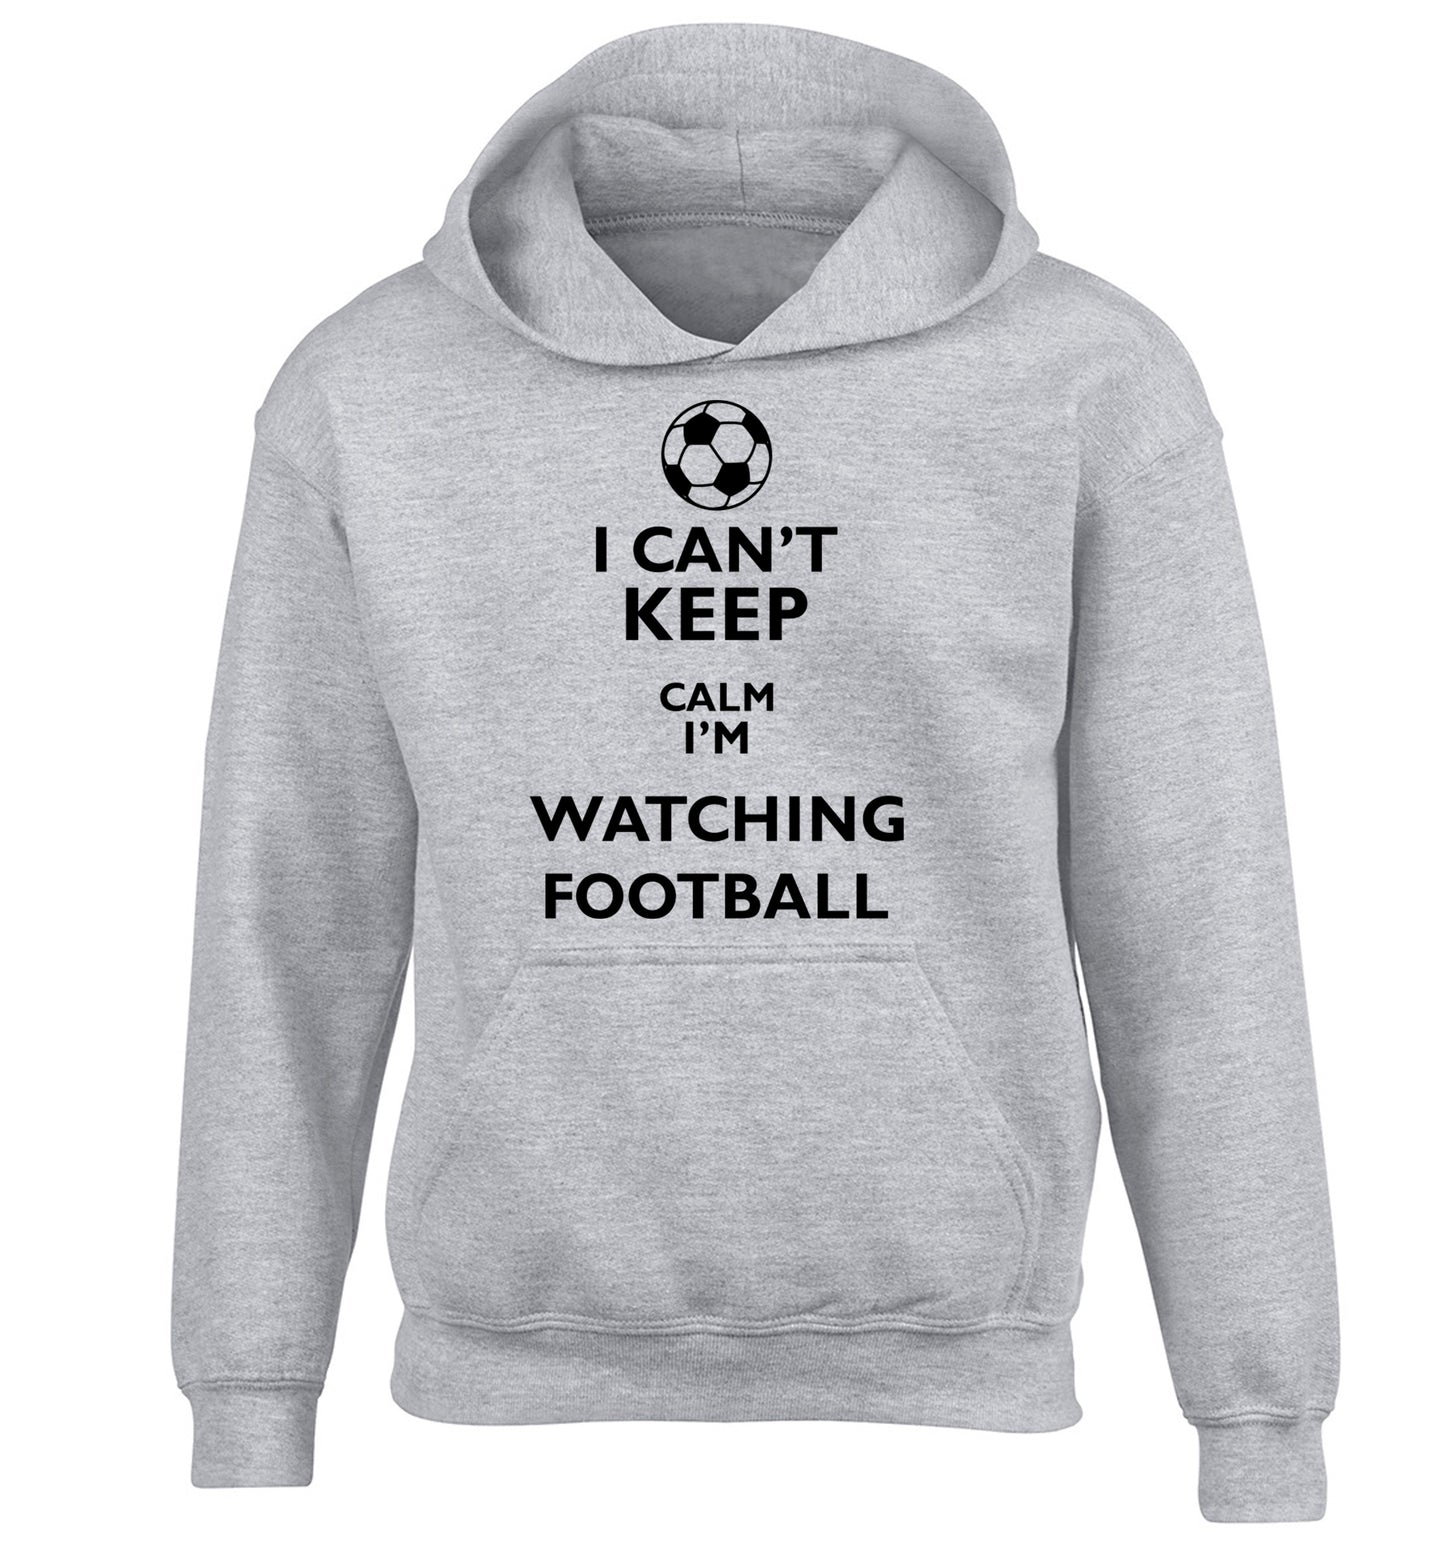 I can't keep calm I'm watching the football children's grey hoodie 12-14 Years